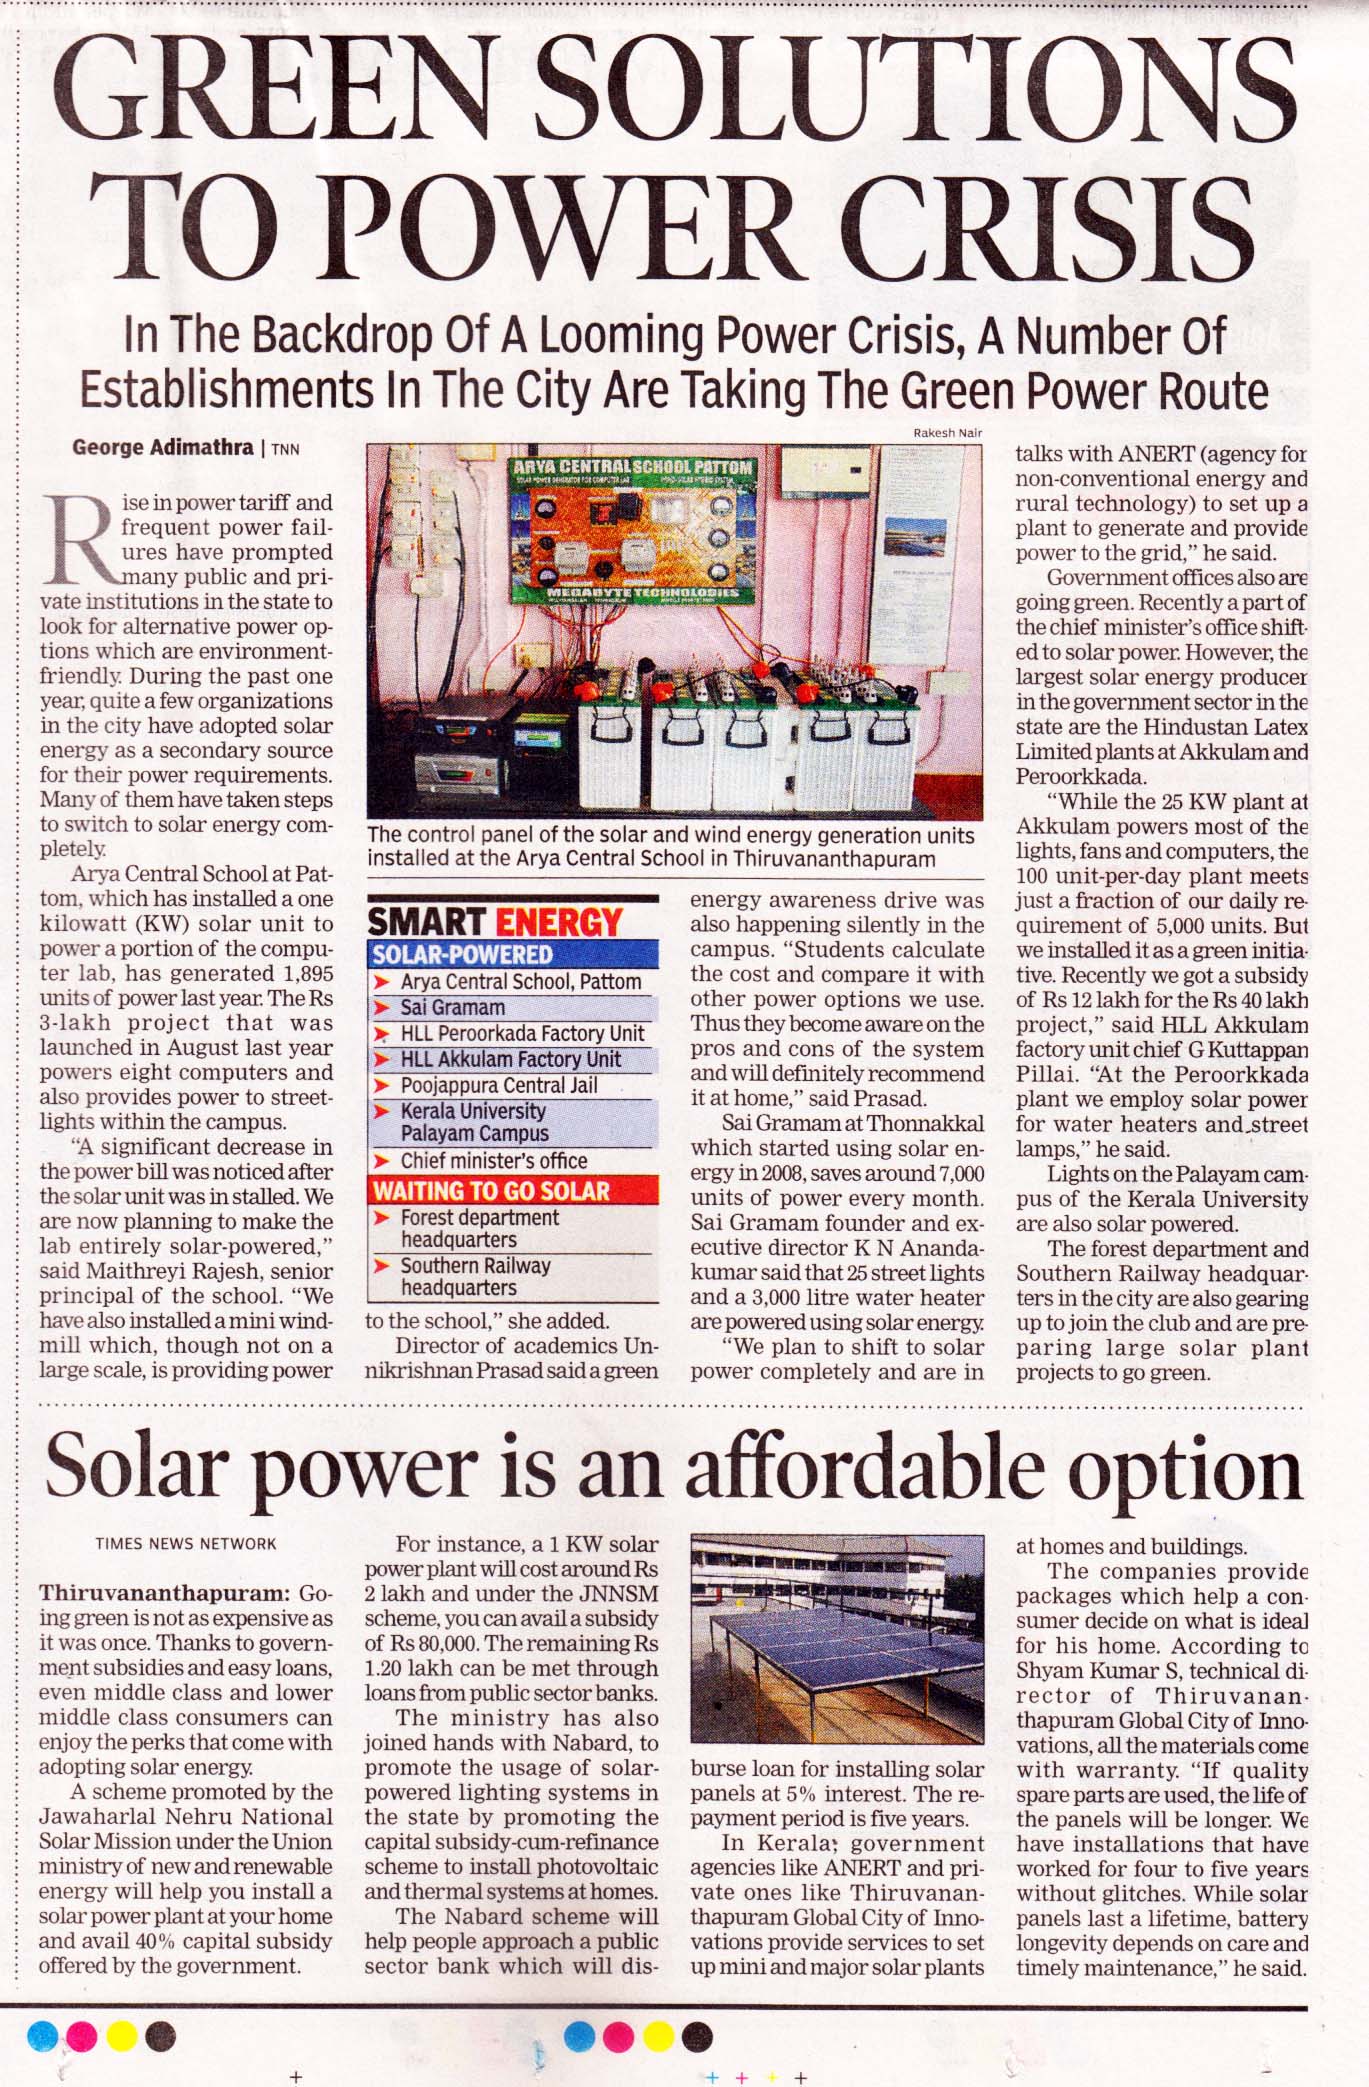 Green solutions to power crisis